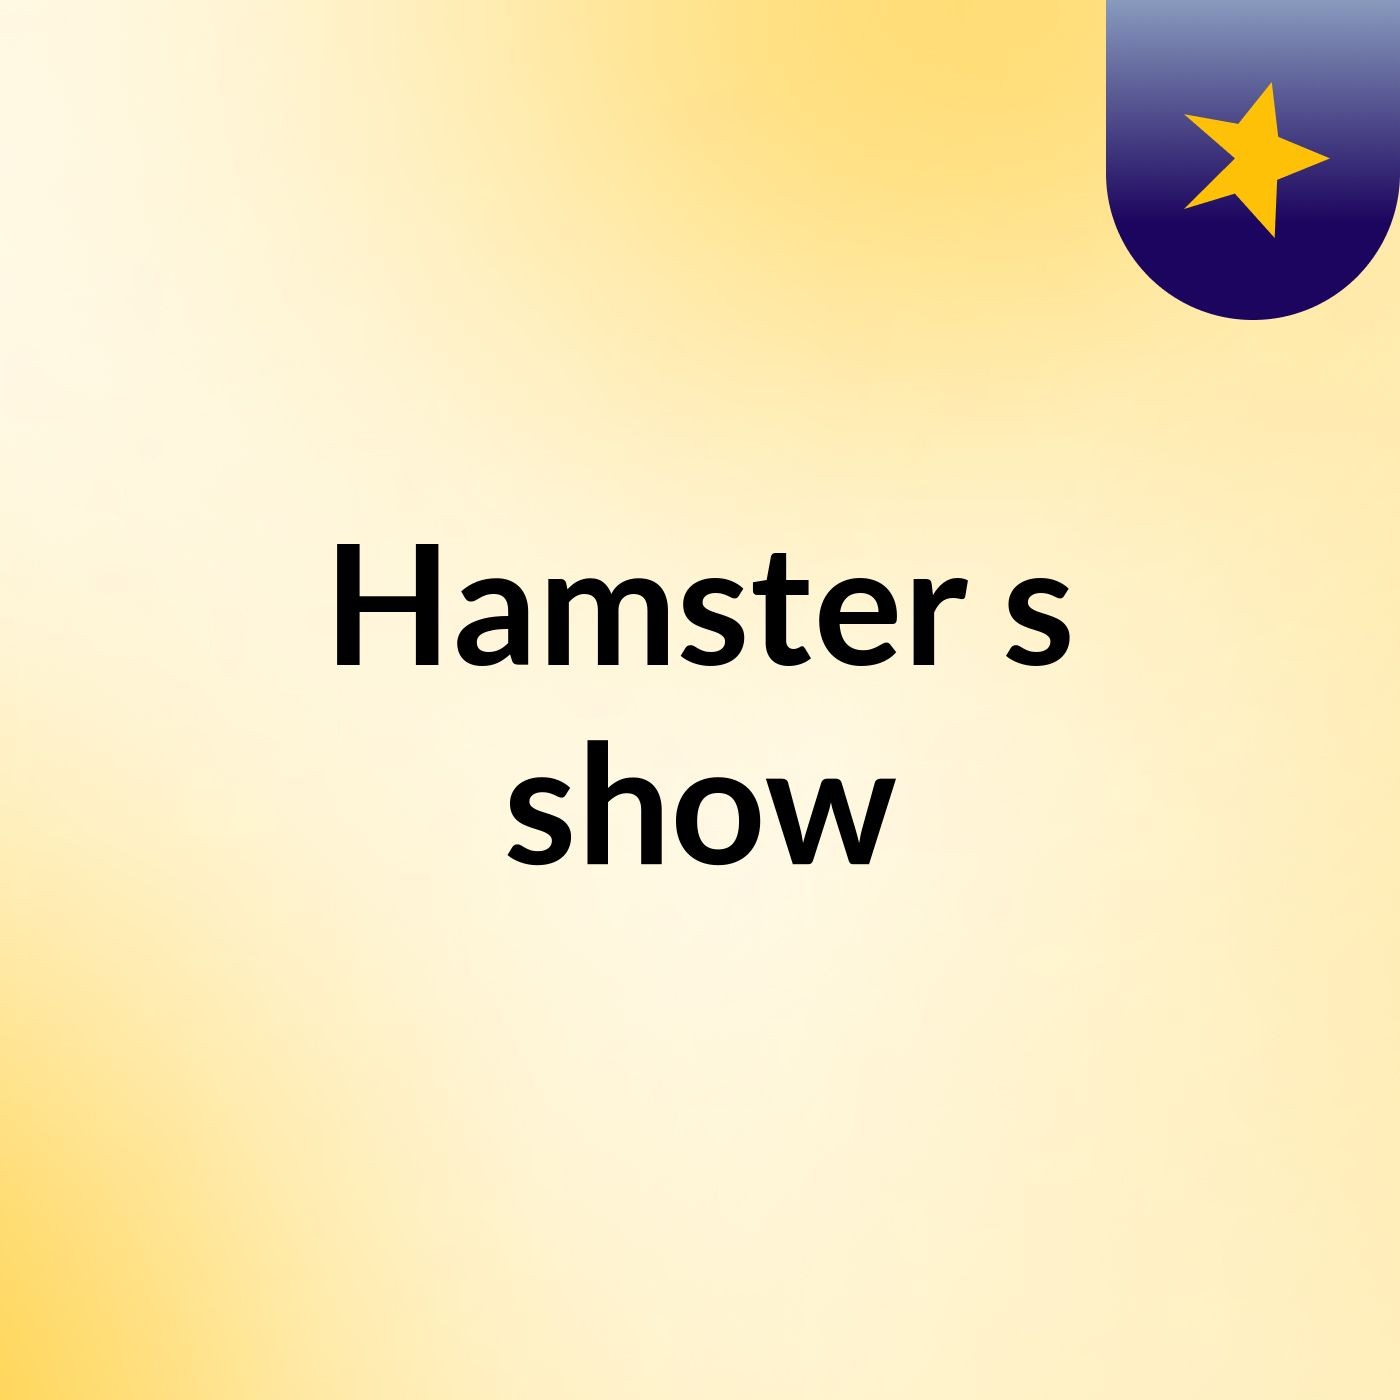 Hamster's show